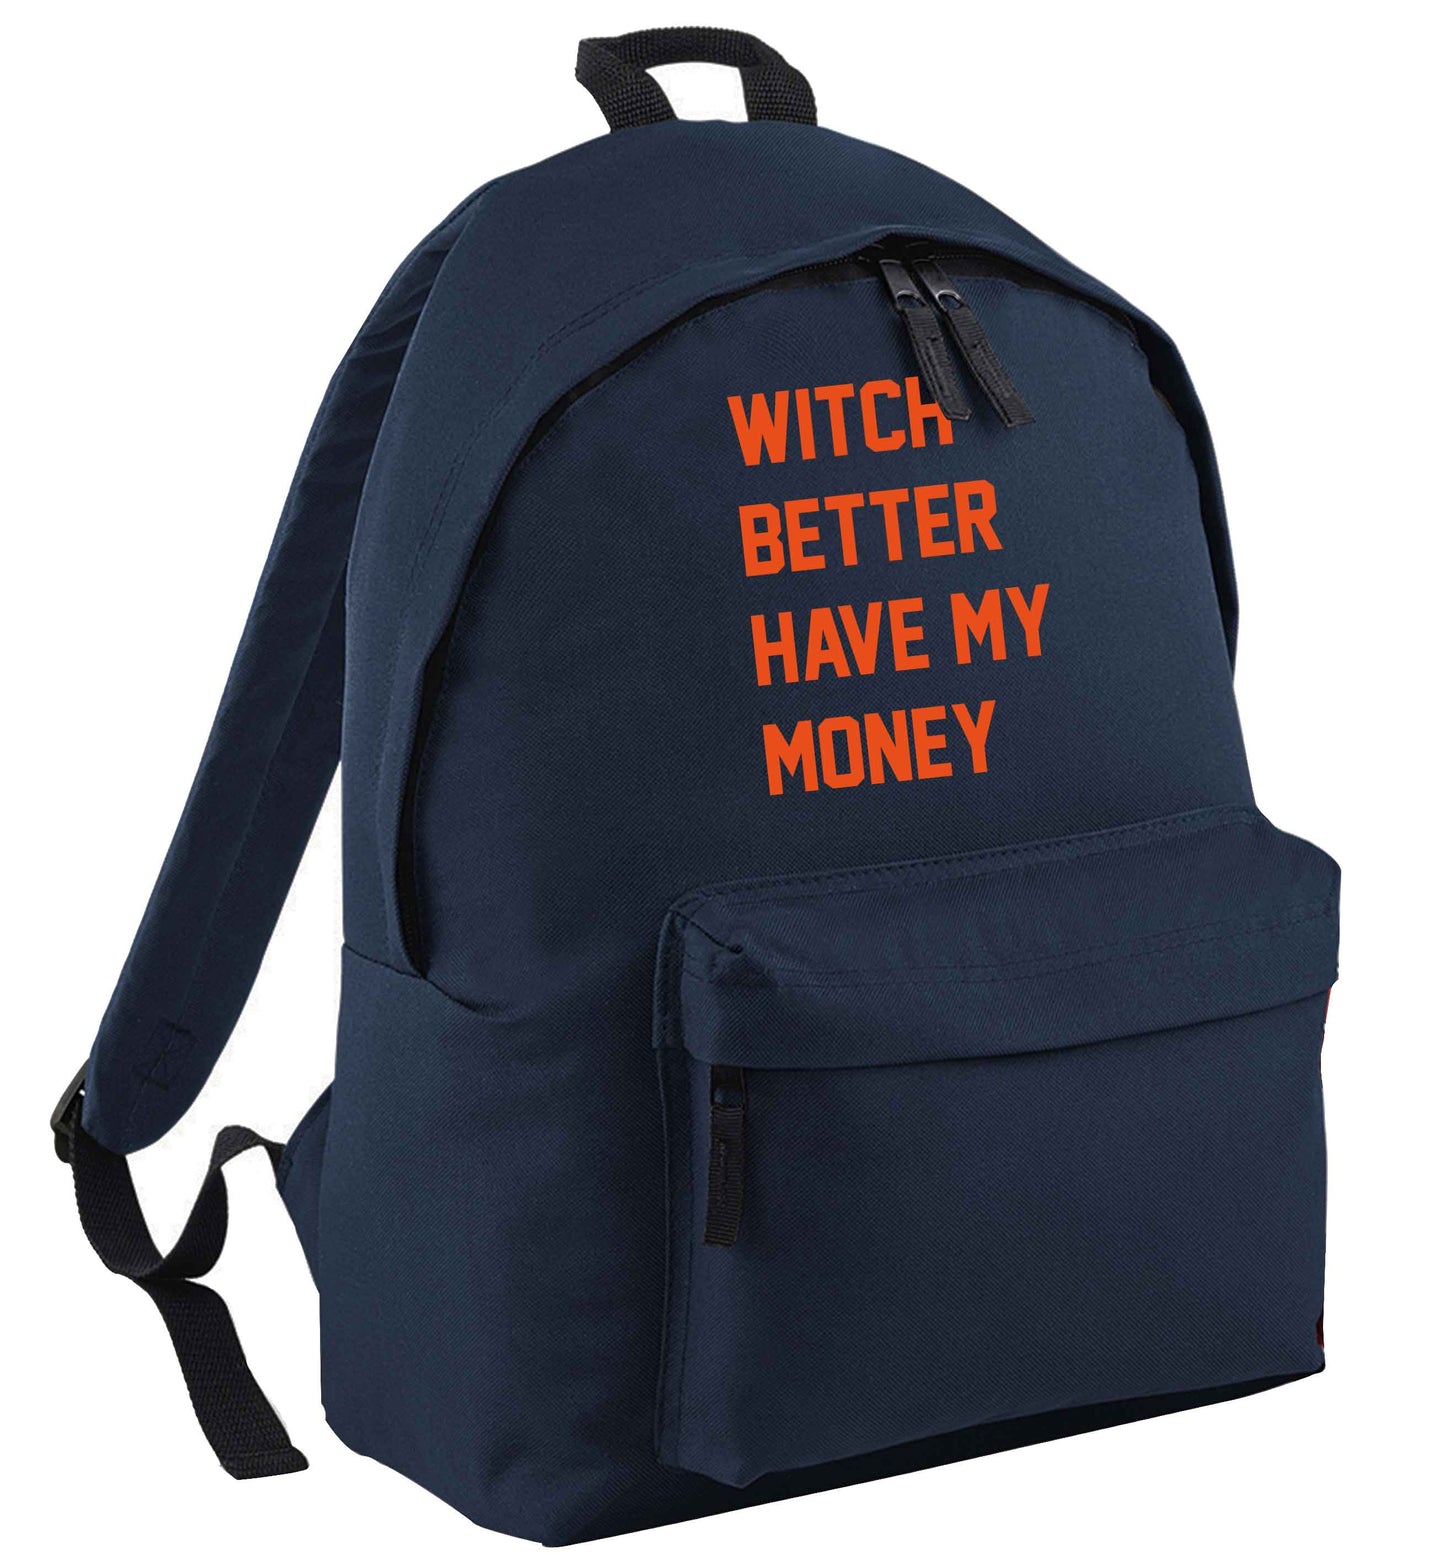 Witch better have my money | Children's backpack